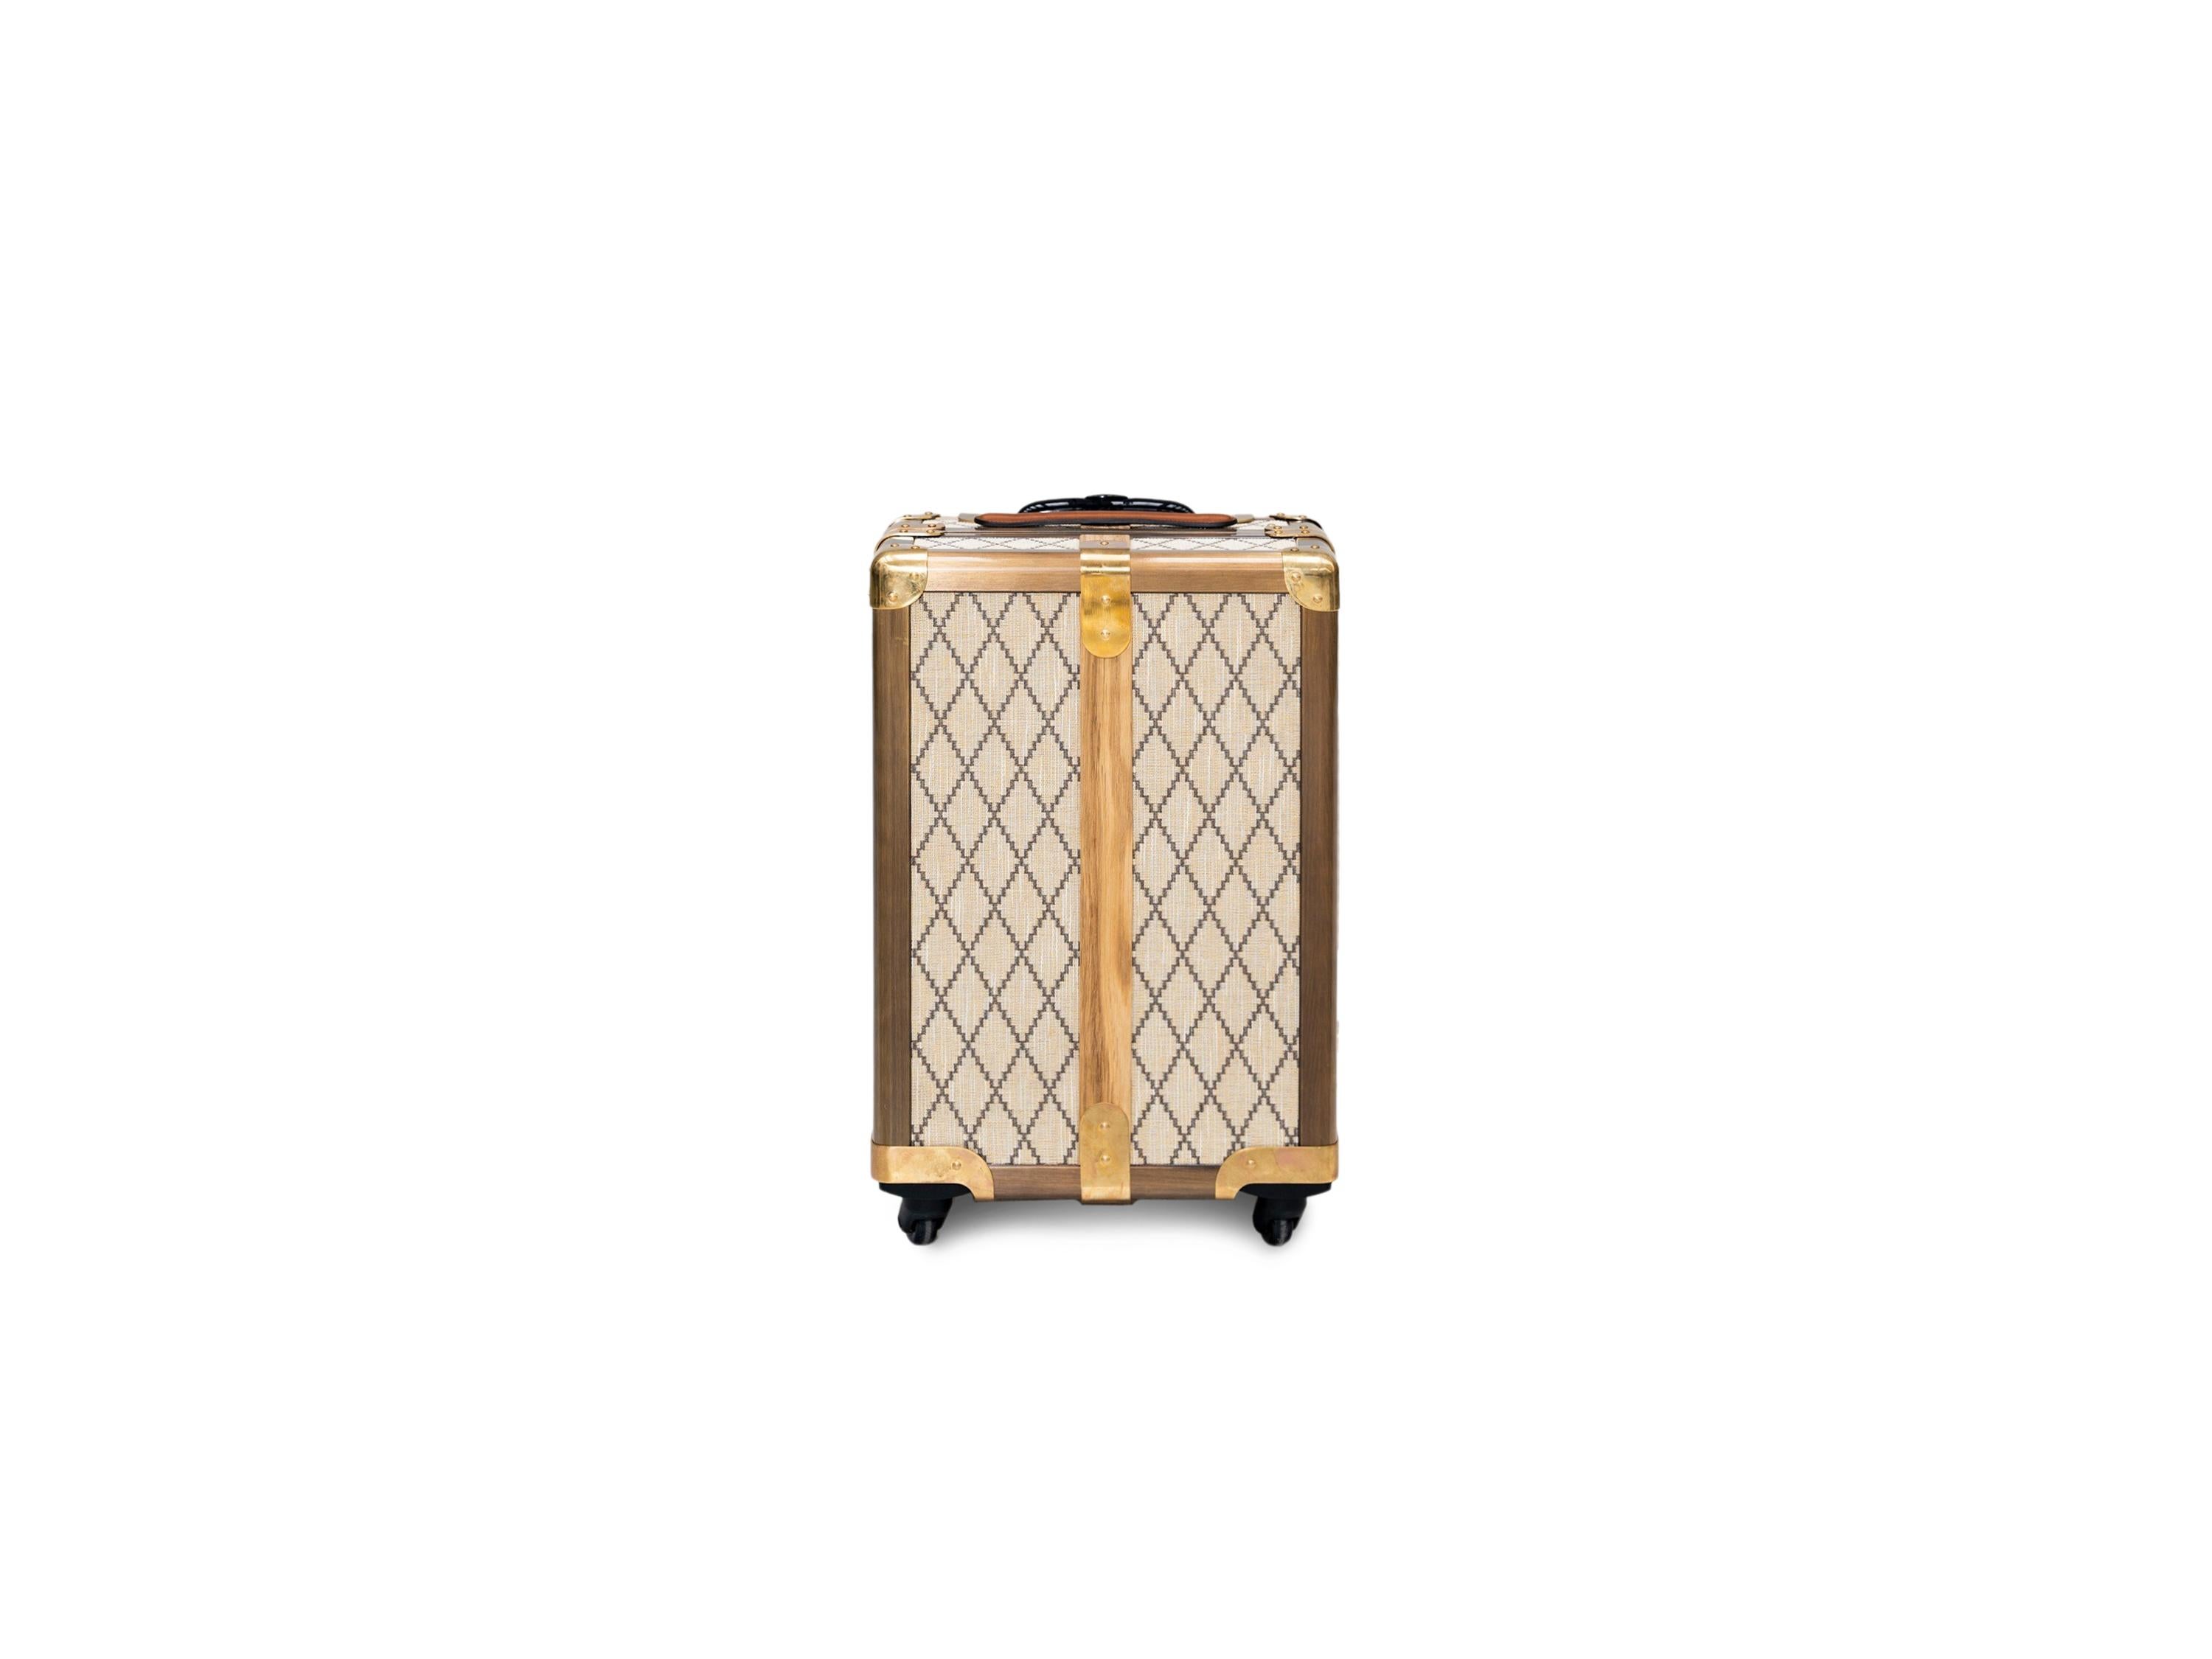 The sound of the waves of the sea, the legends of sailors, the secrets of the Mediterranean. A wonderful world is contained in Portofino, the luxury suitcase that pays homage to the village of elegance and love. Timeless beauty told by its precious